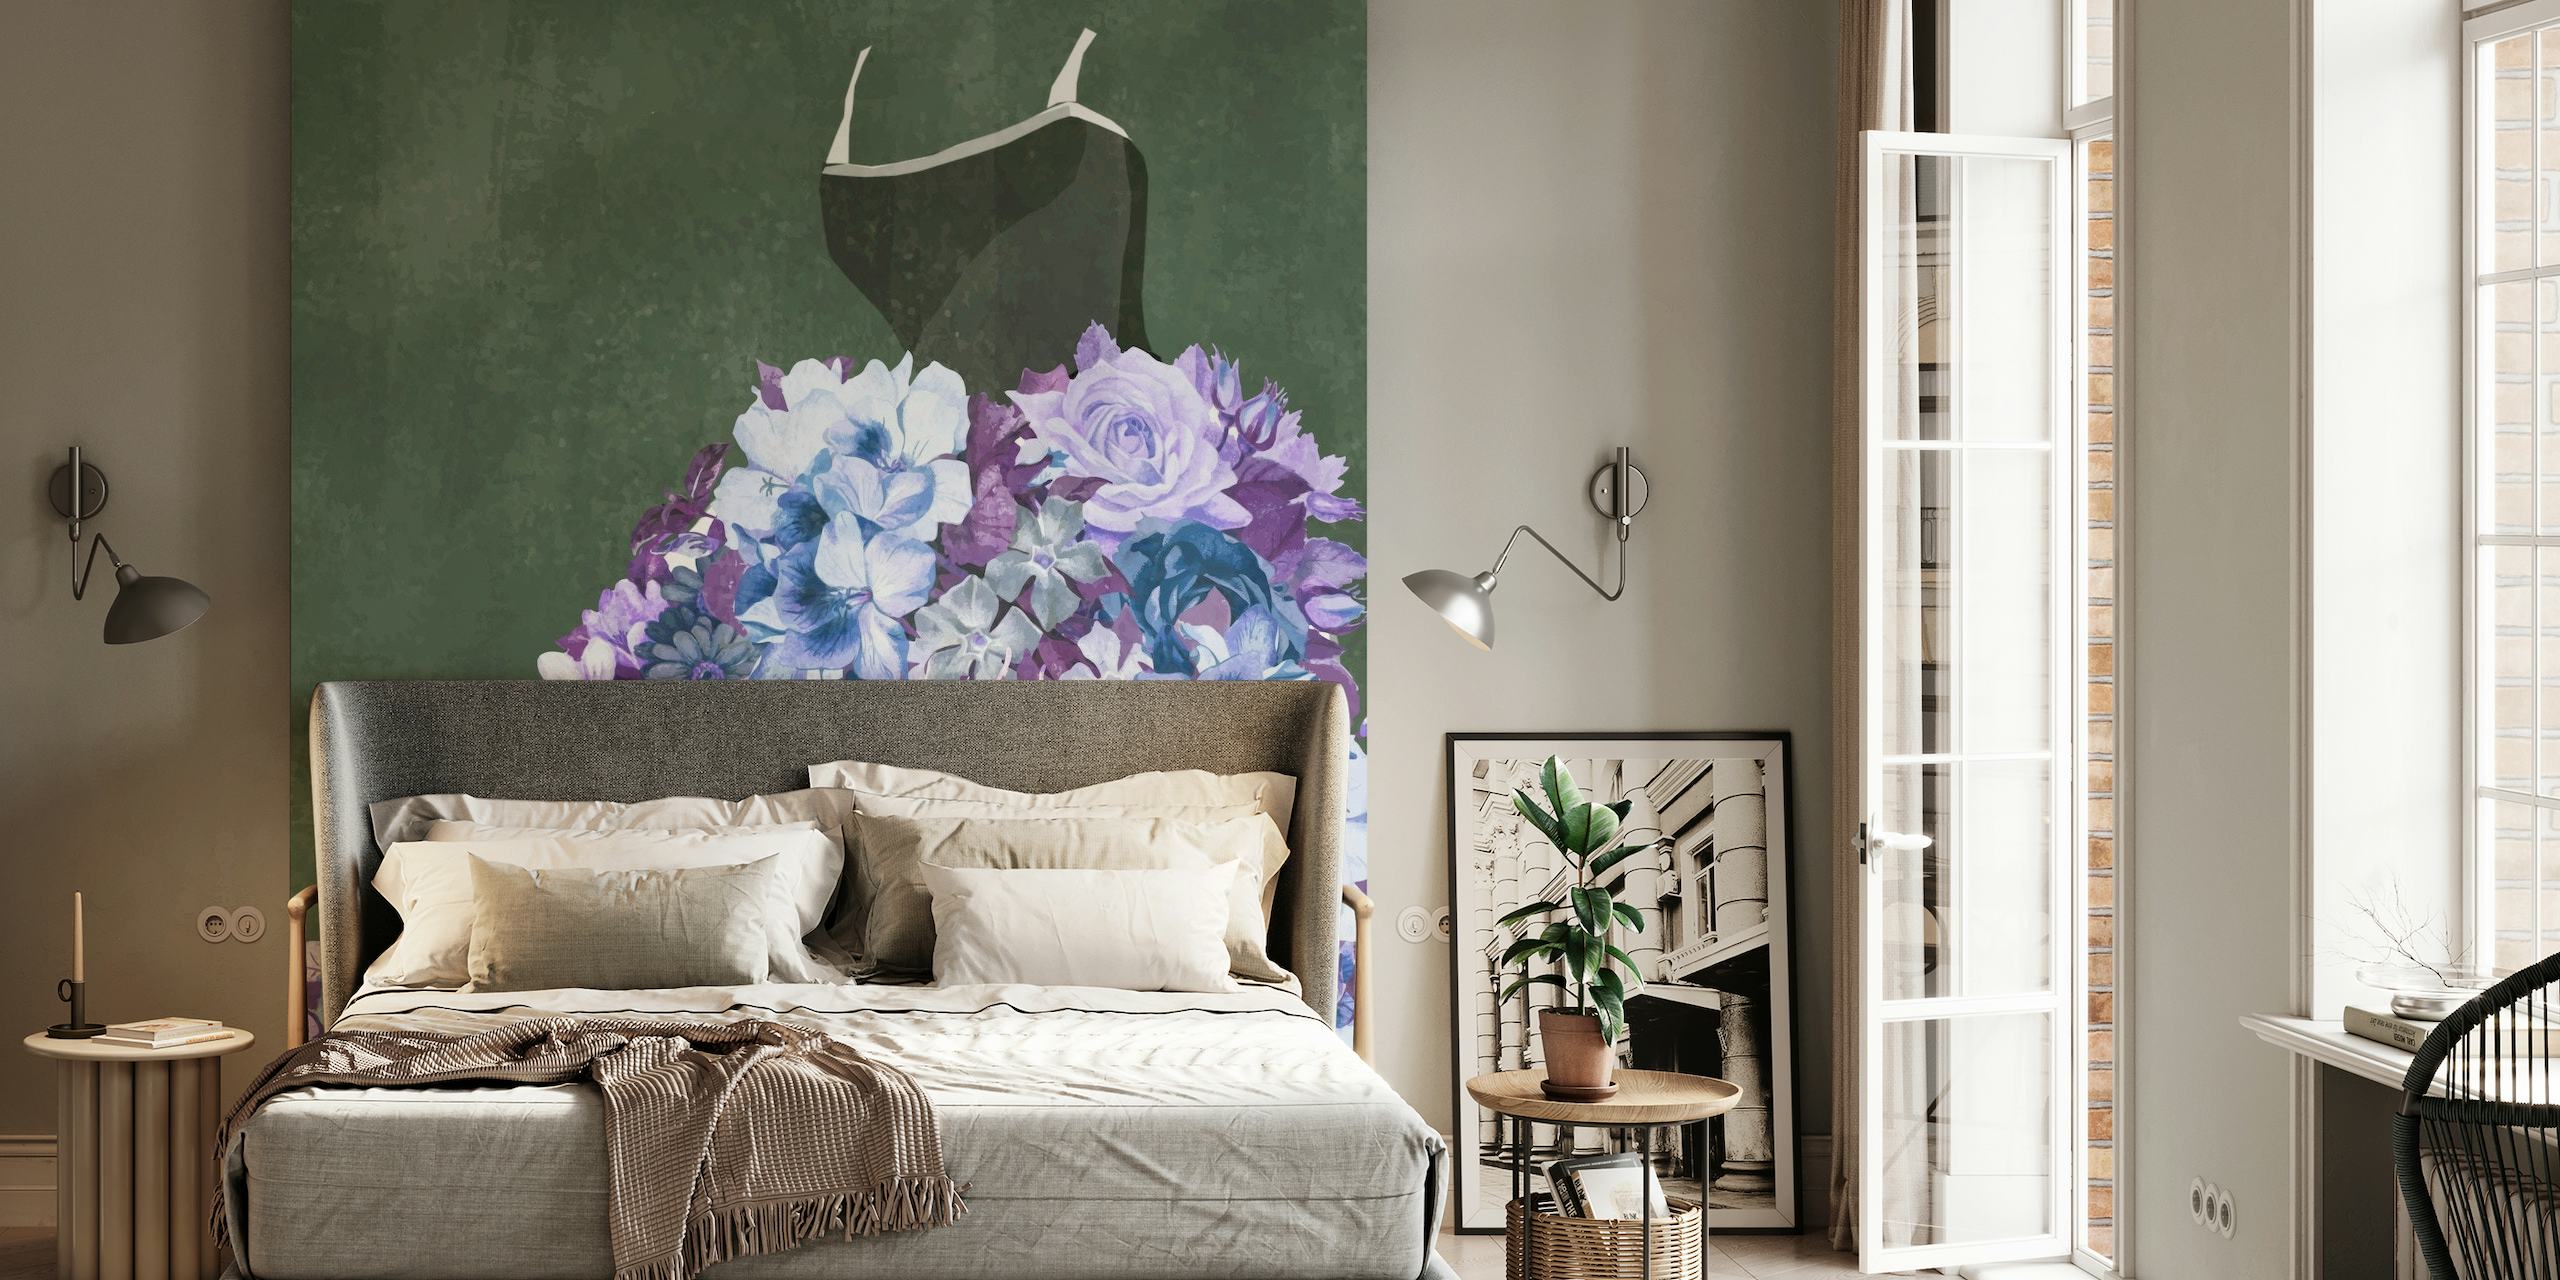 Feminine Flower Dress wall mural with floral pattern on a soft, textured background